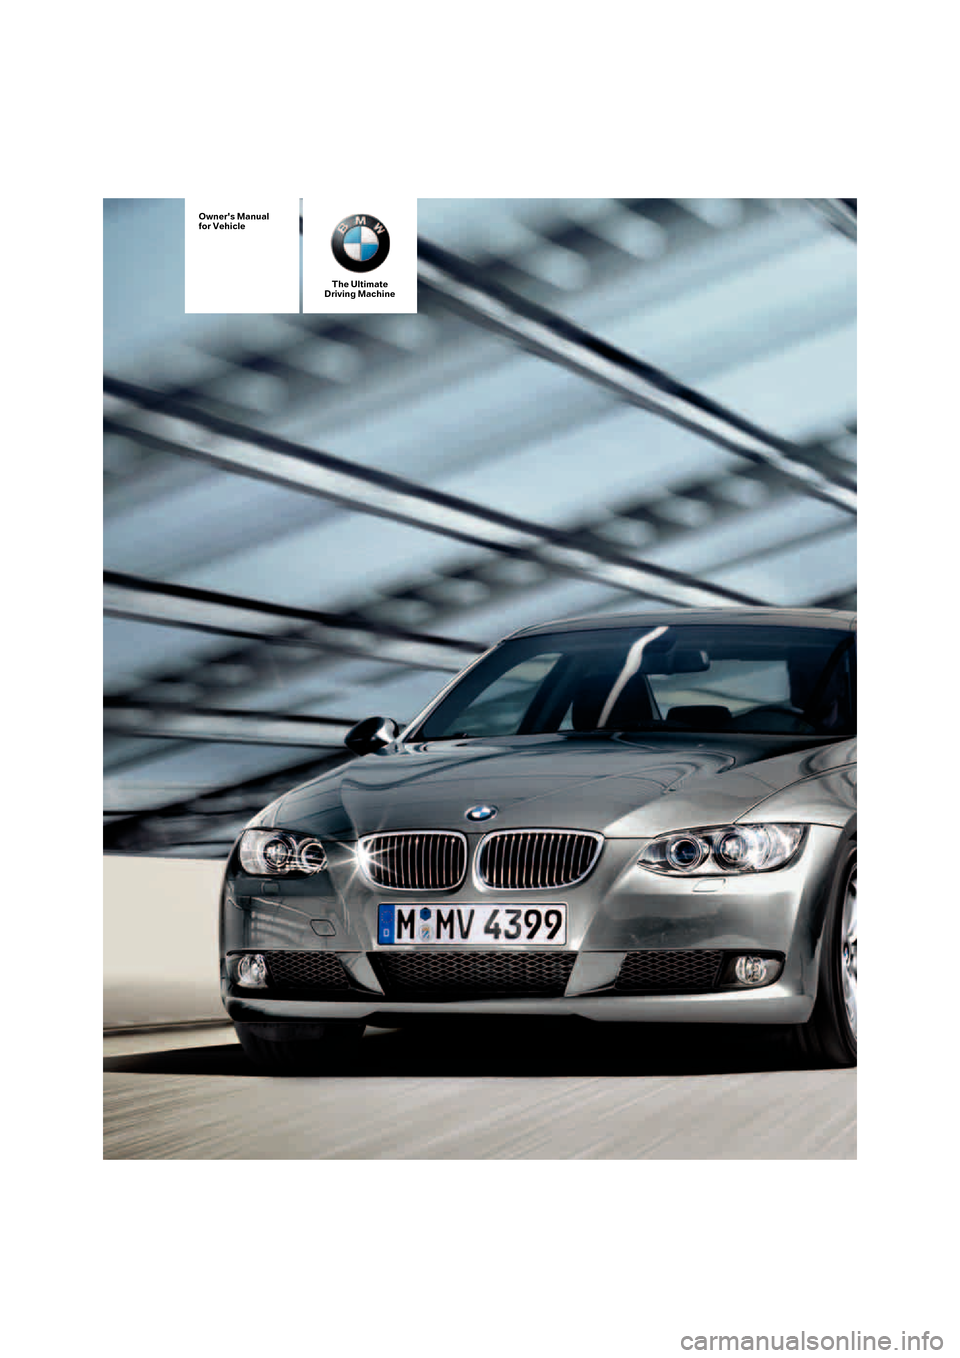 BMW 328I COUPE 2007 E92 Owners Manual The Ultimate
Driving Machine
Owners Manual
for Vehicle 